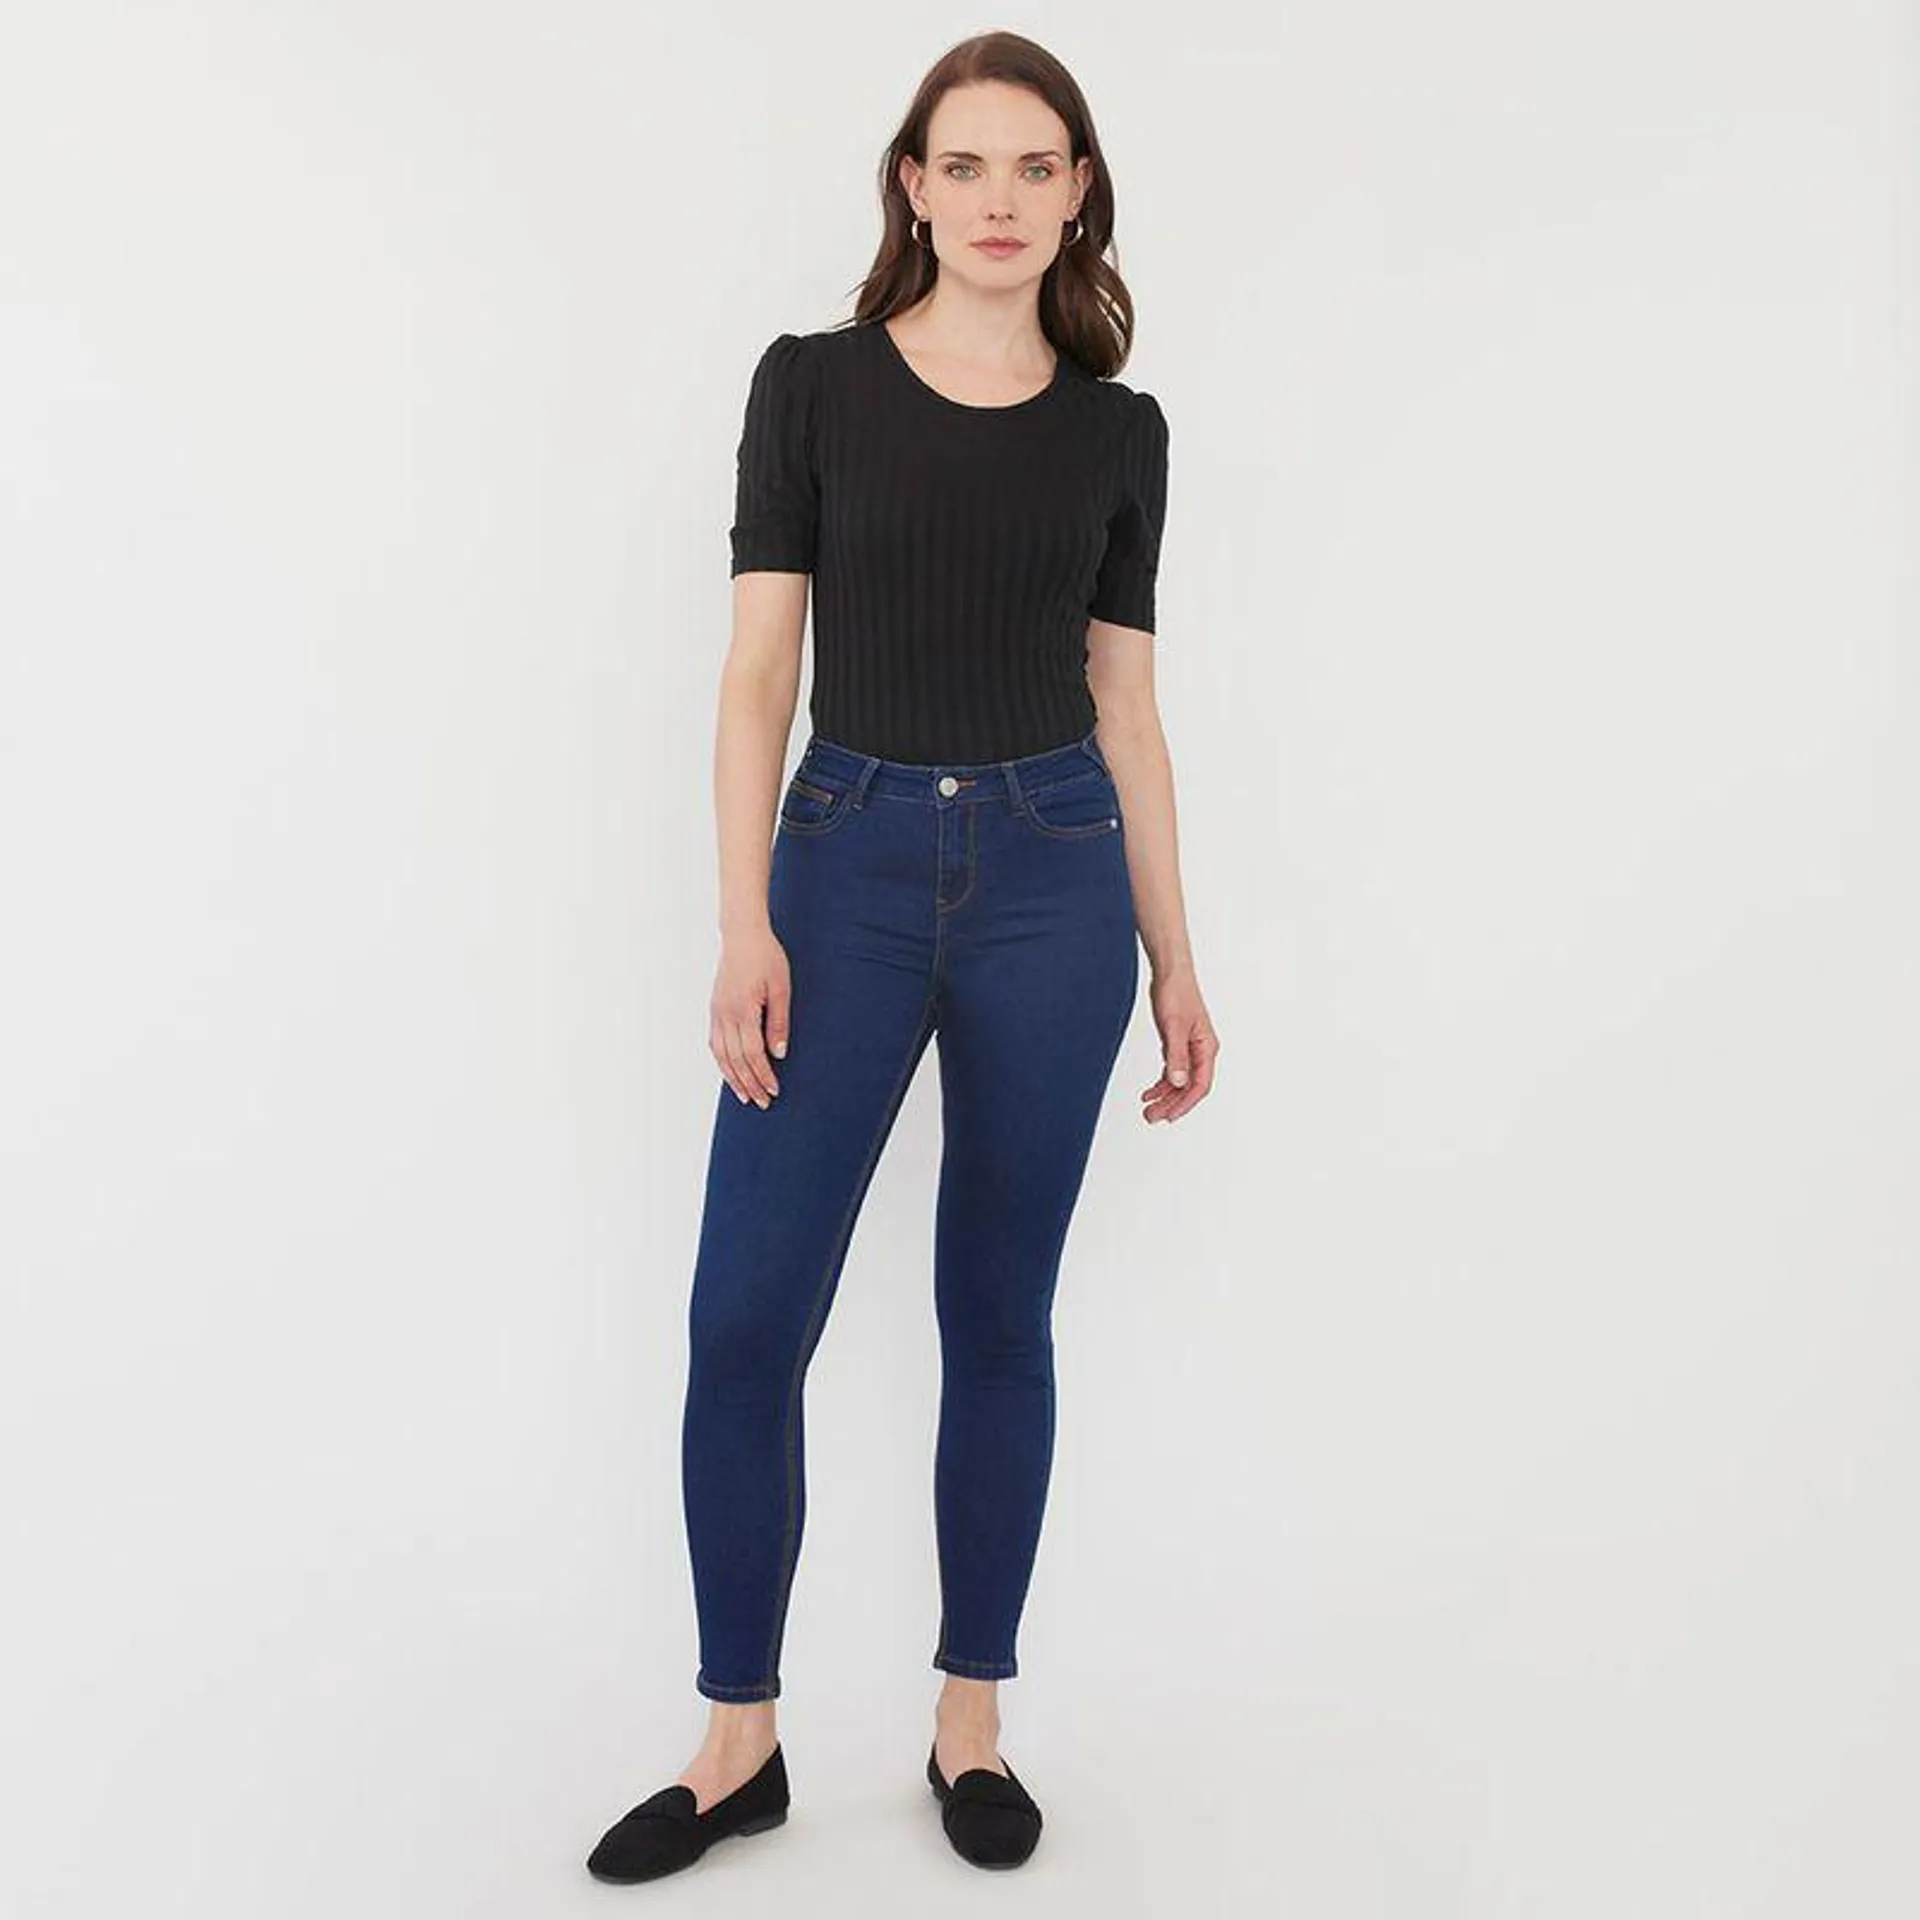 Jeans Mujer Skinny Push Up Azul Oscuro